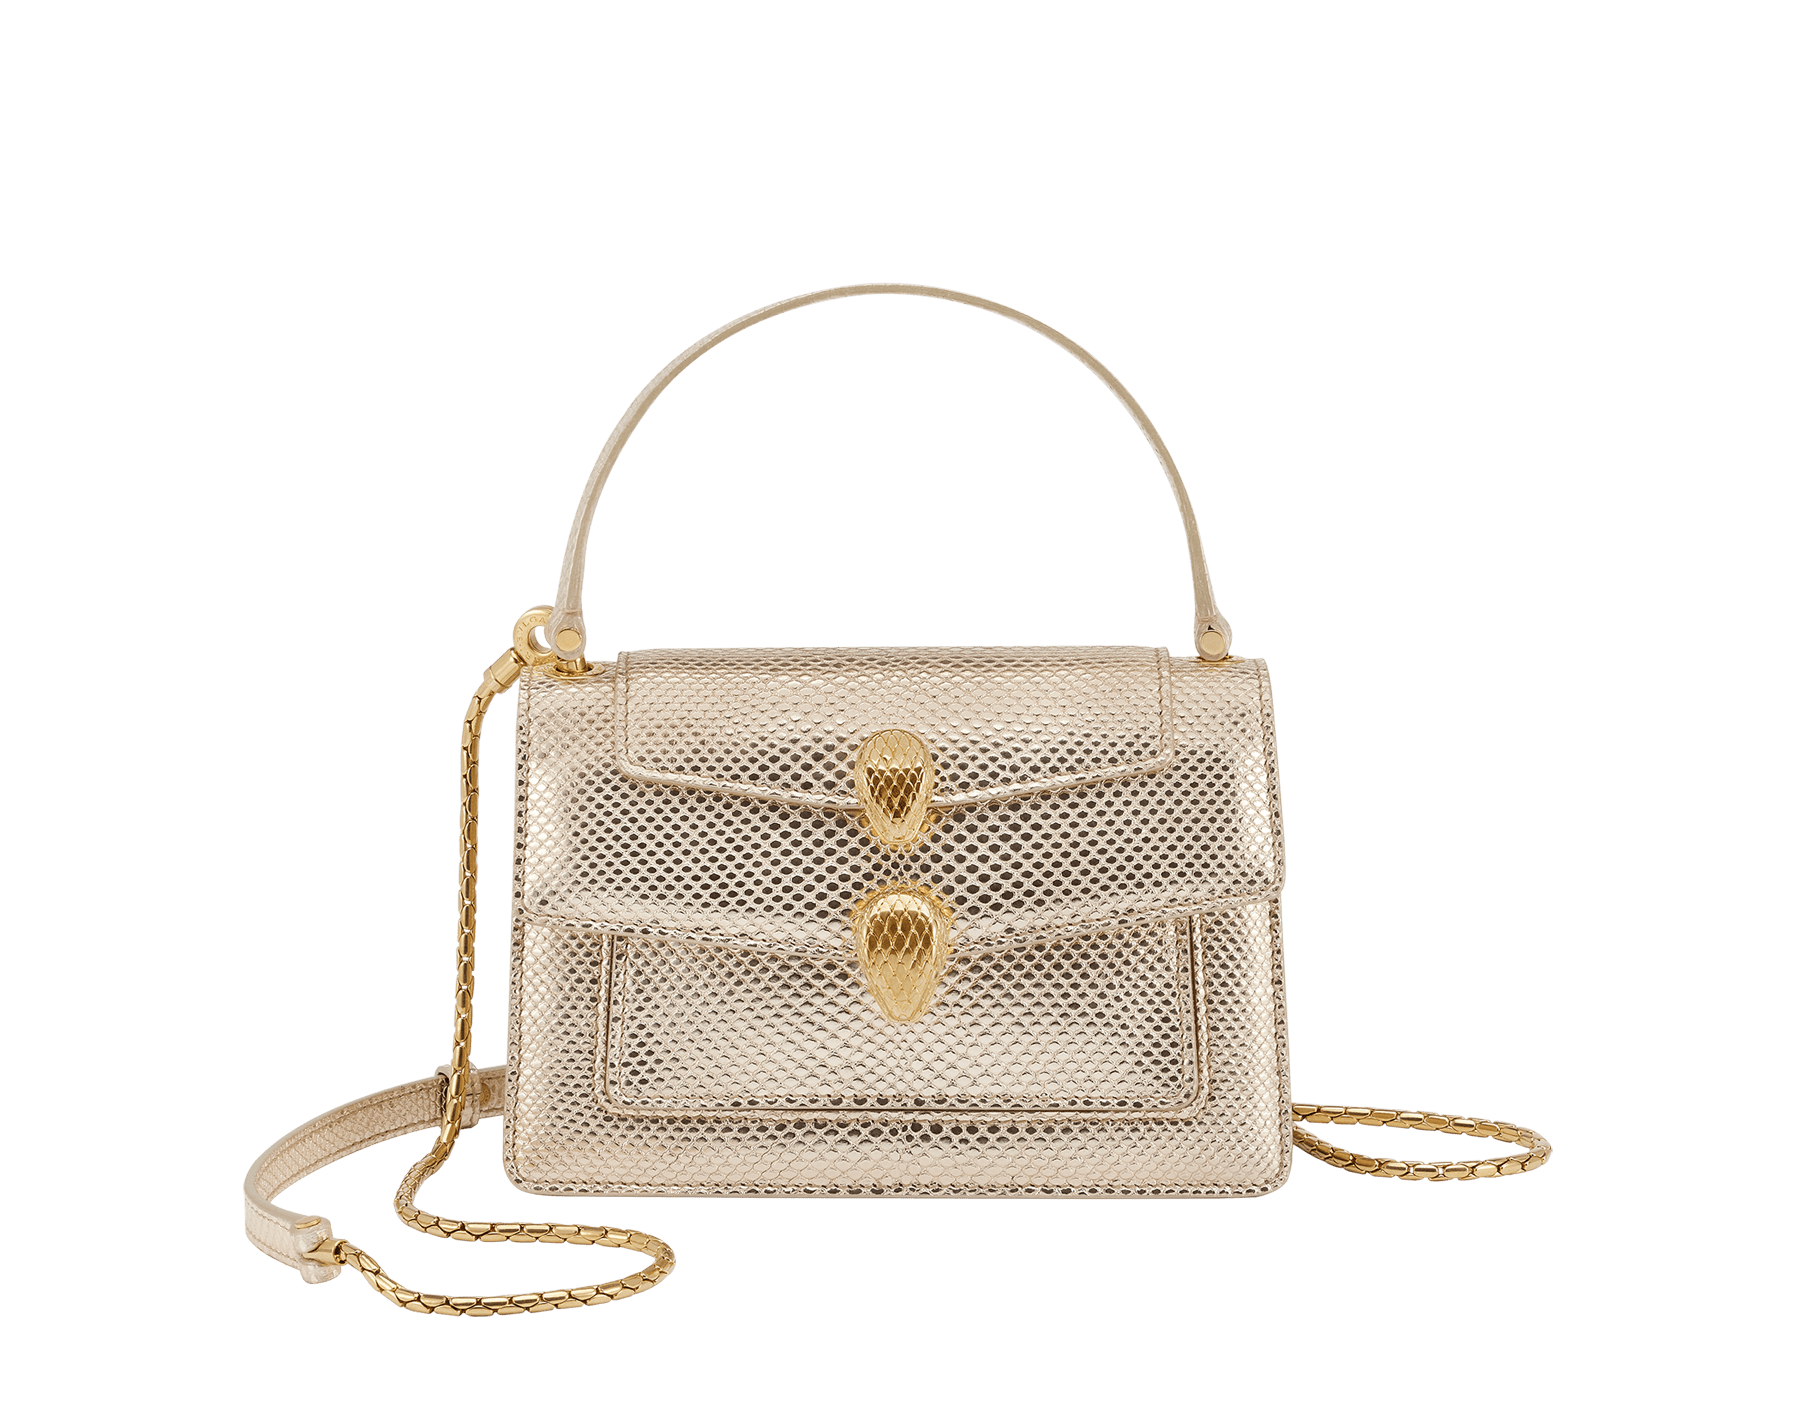 Alexander Wang x Bvlgari belt bag in light gold Molten karung skin with black nappa leather lining. Exclusively redesigned double Serpenti head clasp in antique gold-plated brass with seductive red enamel eyes. 291188 image 1